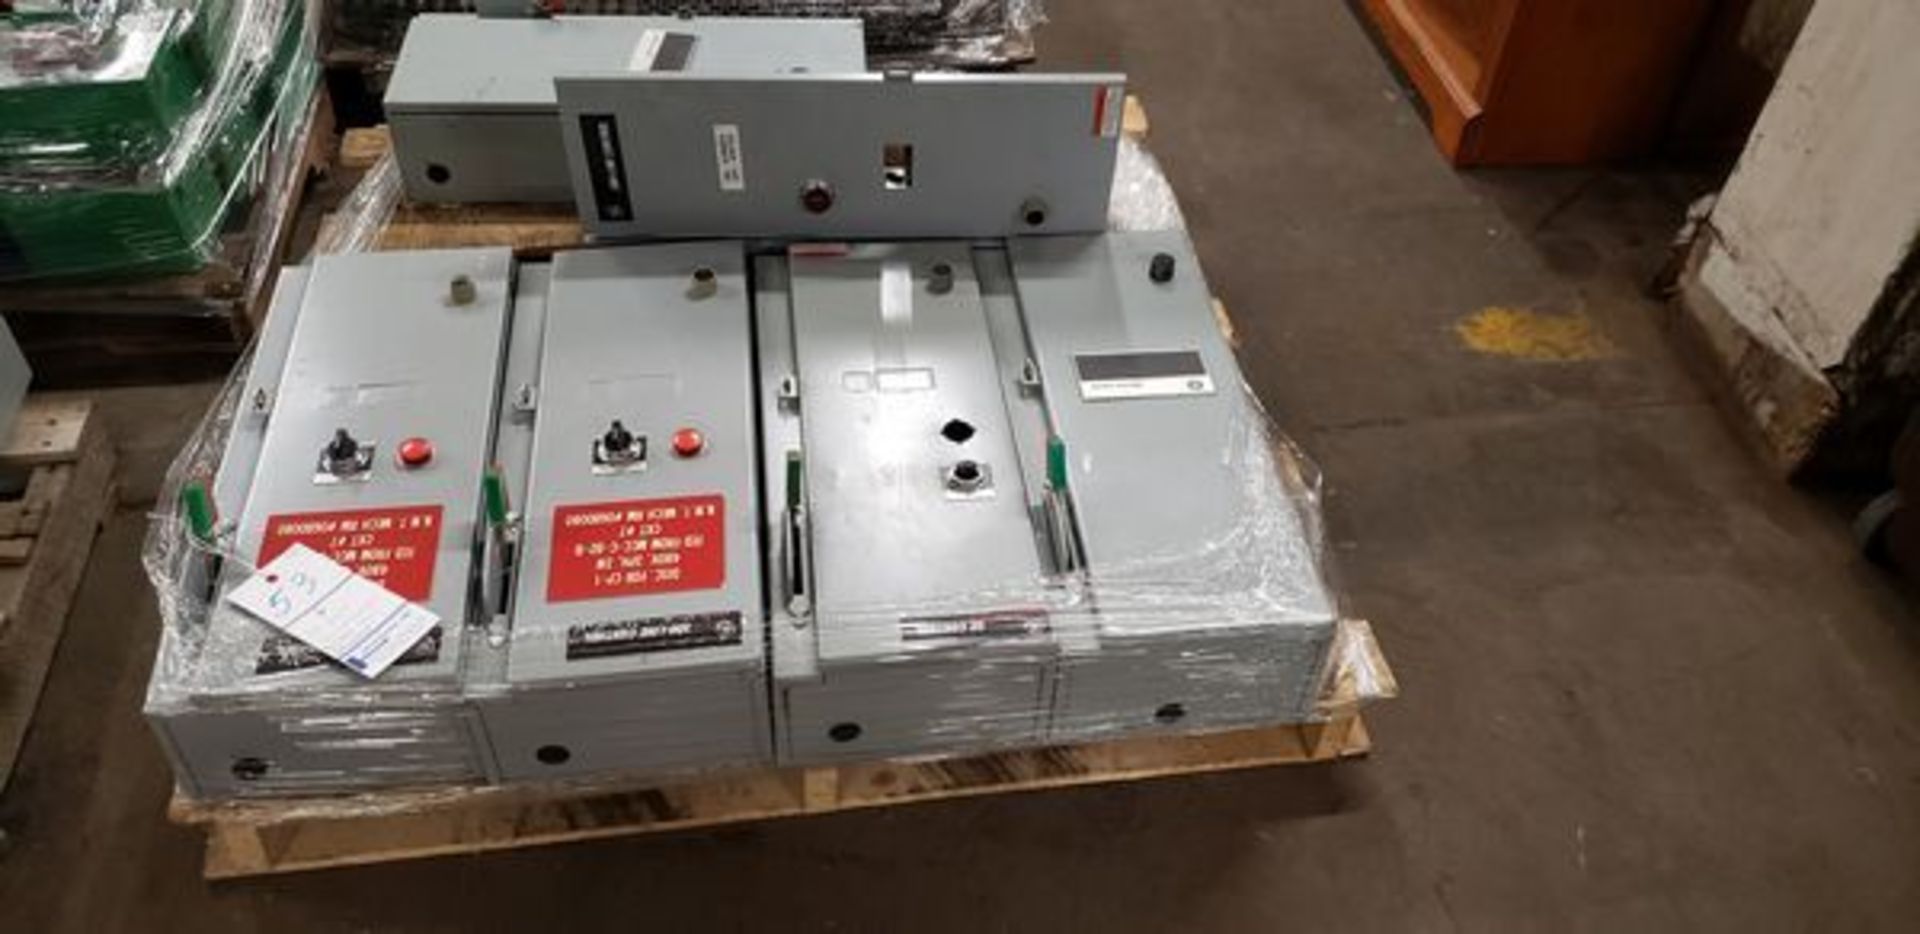 LOT OF 6 GE 480V 300 LINE CONTROL BOXES